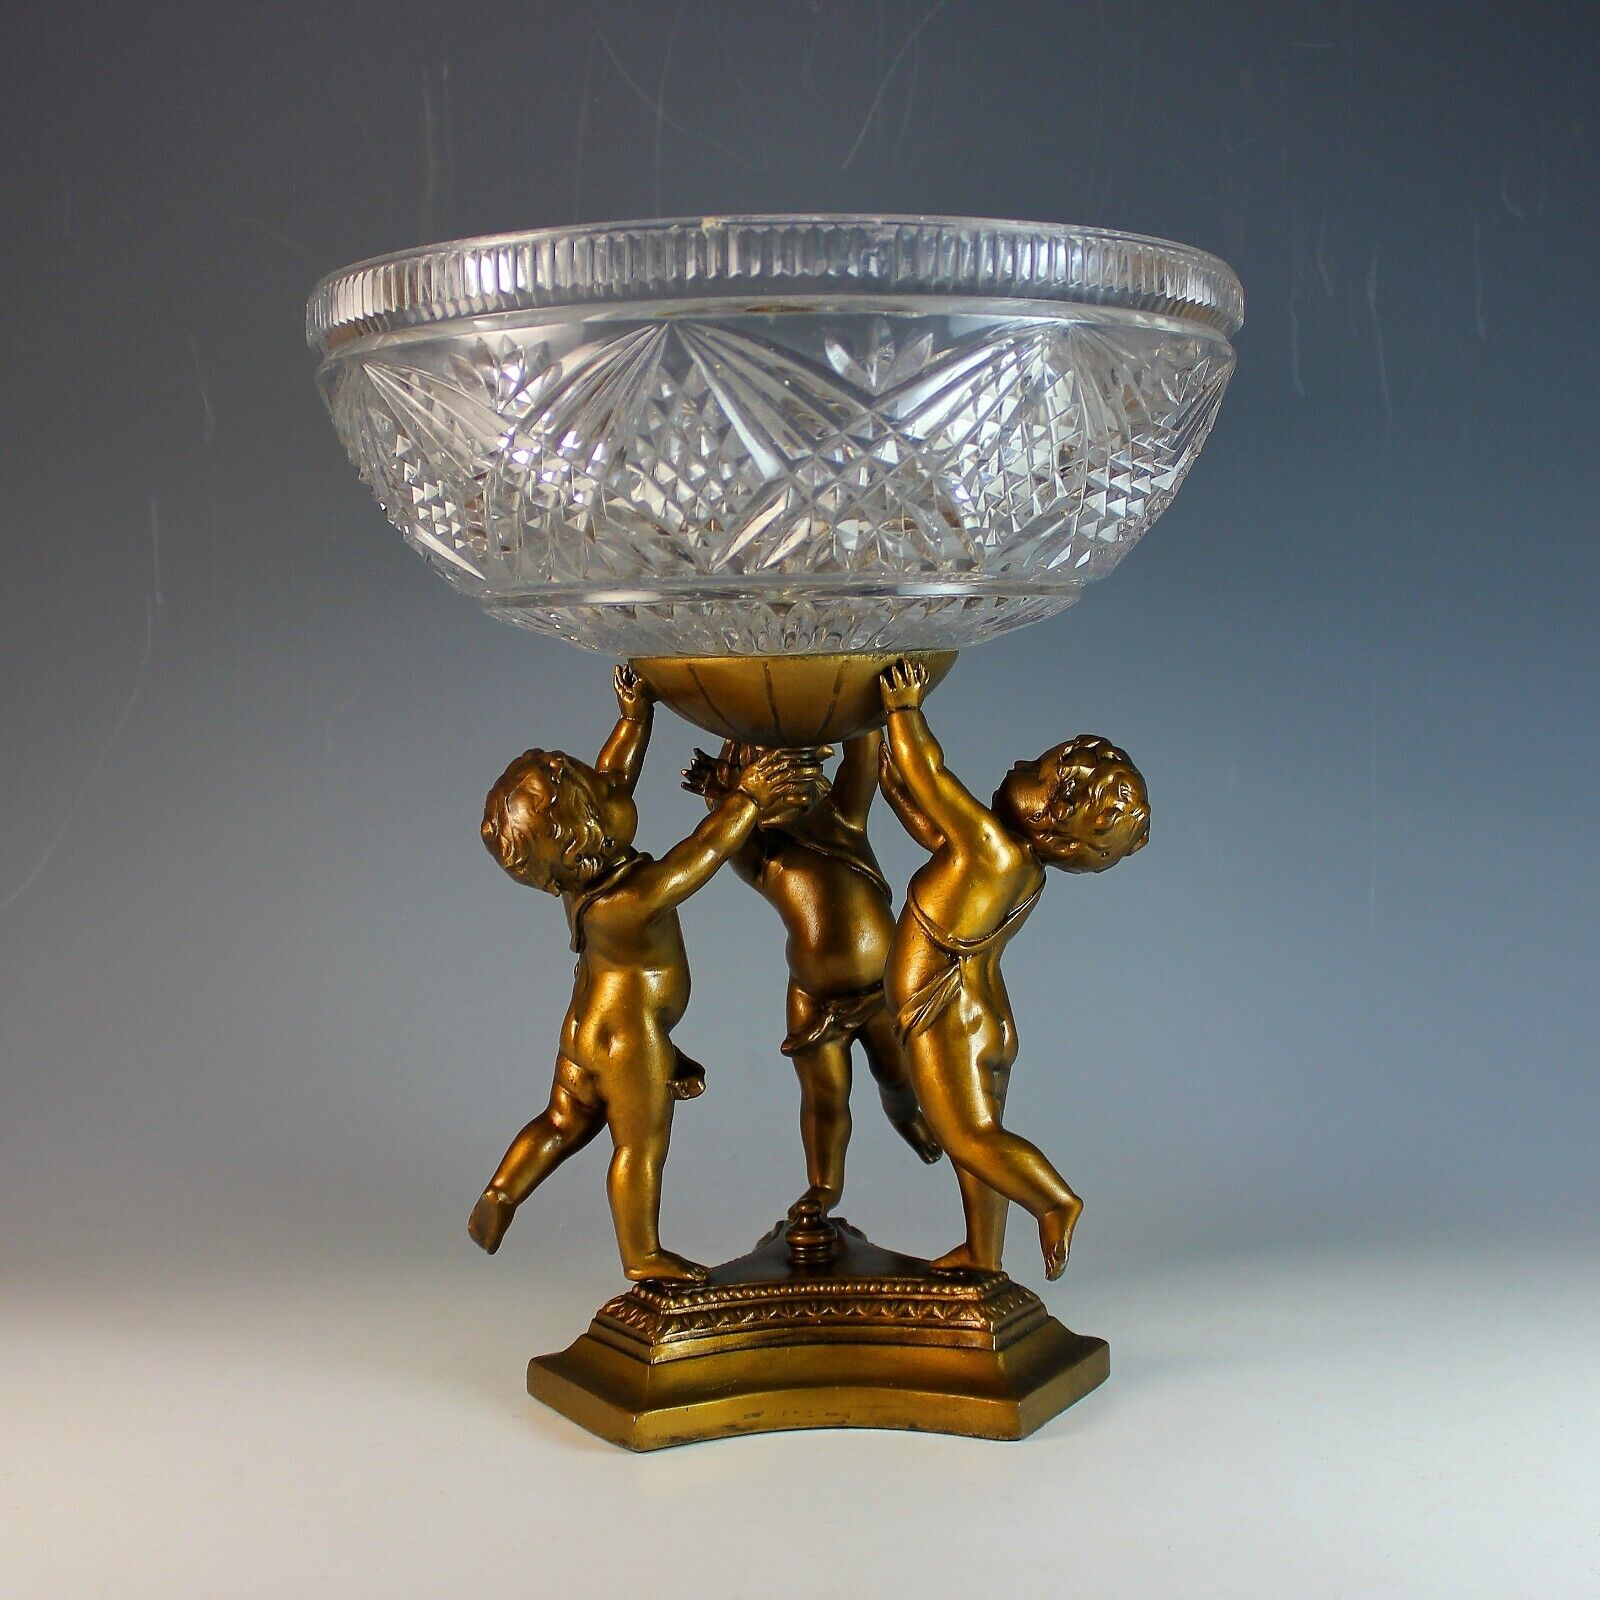 Vintage Pedestal Centerpiece with Putti Base and Glass Bowl